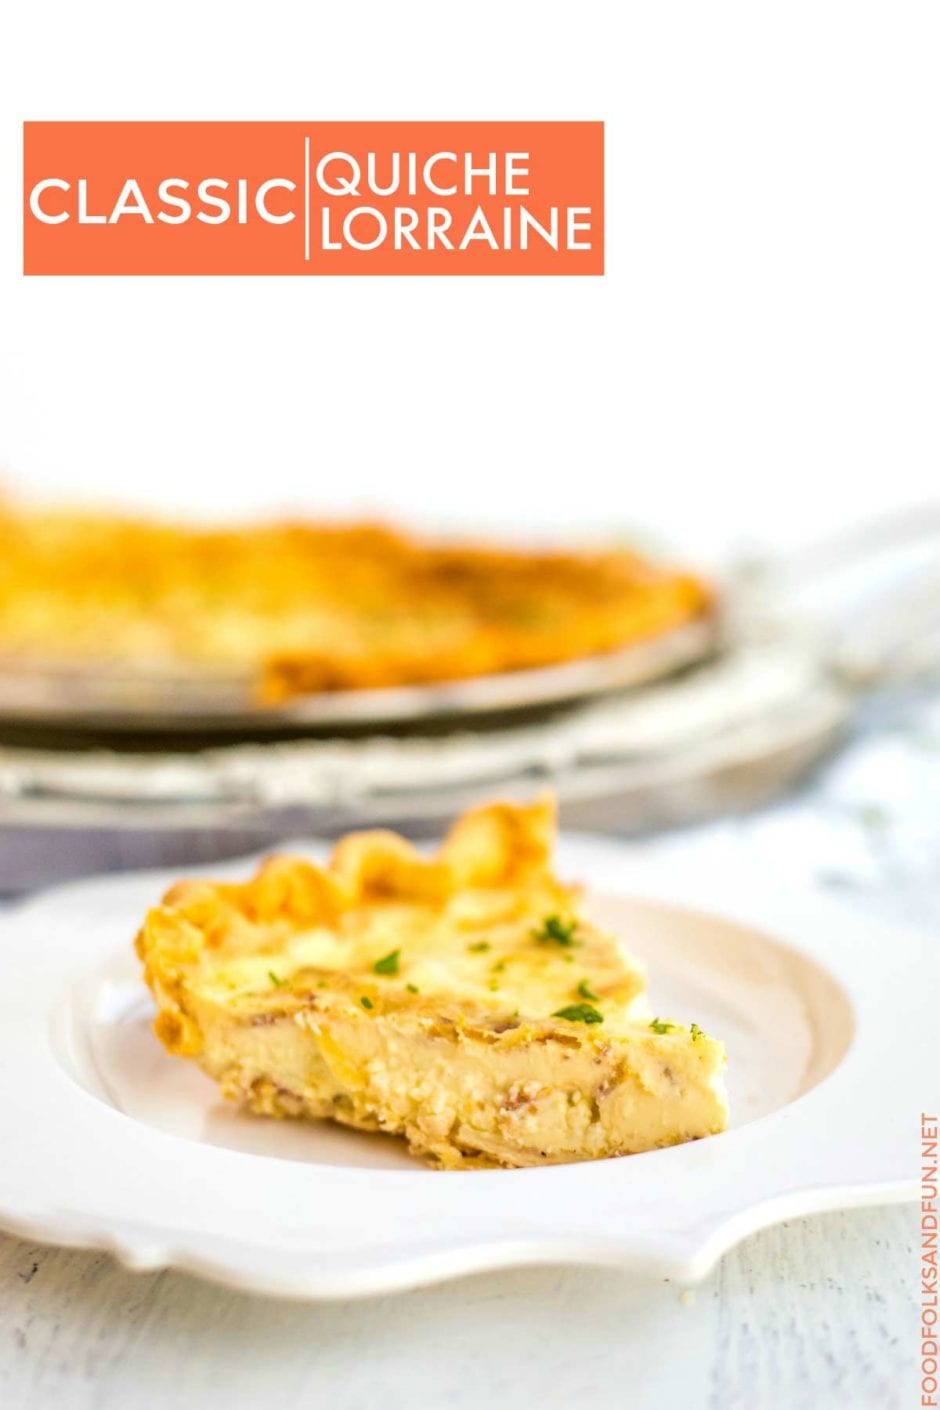 Quiche picture with text overlay for Pinterest. 